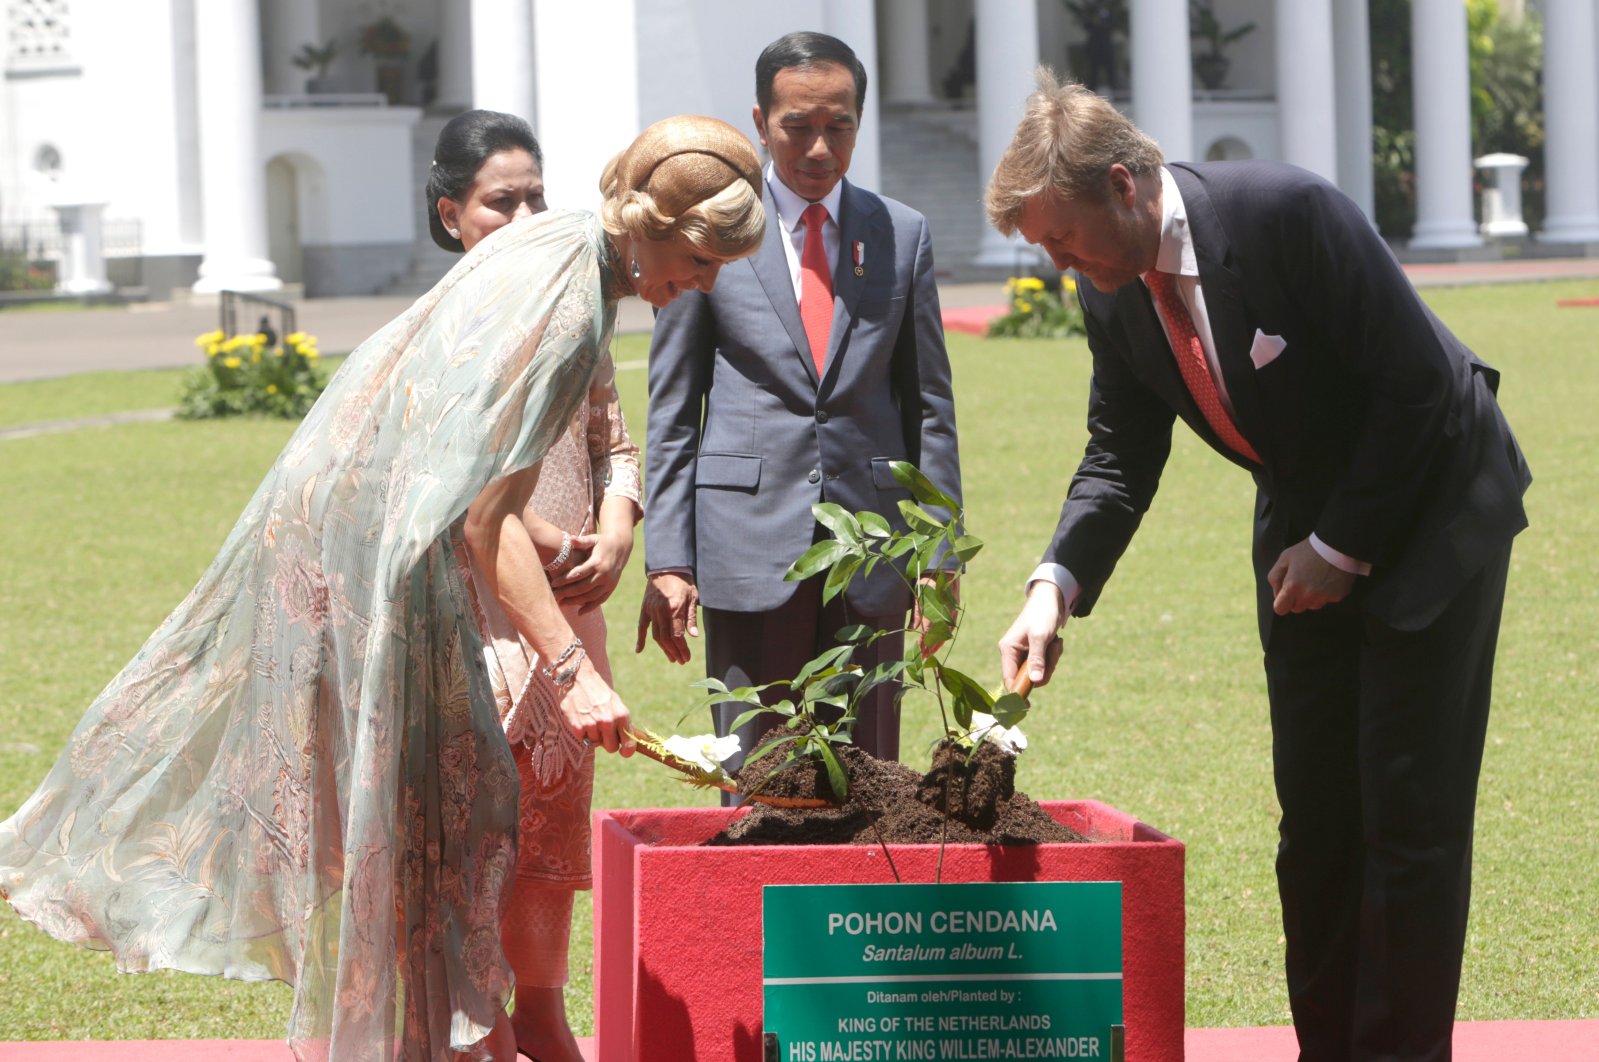 Dutch King Willem-Alexander (R) and Queen Maxima (L) accompanied by Indonesian President Joko Widodo (2nd R) and wife Iriana Joko Widodo (2nd L) plant a tree during their visit to the Presidential Palace in Bogor on March 10, 2020. (AFP Photo)